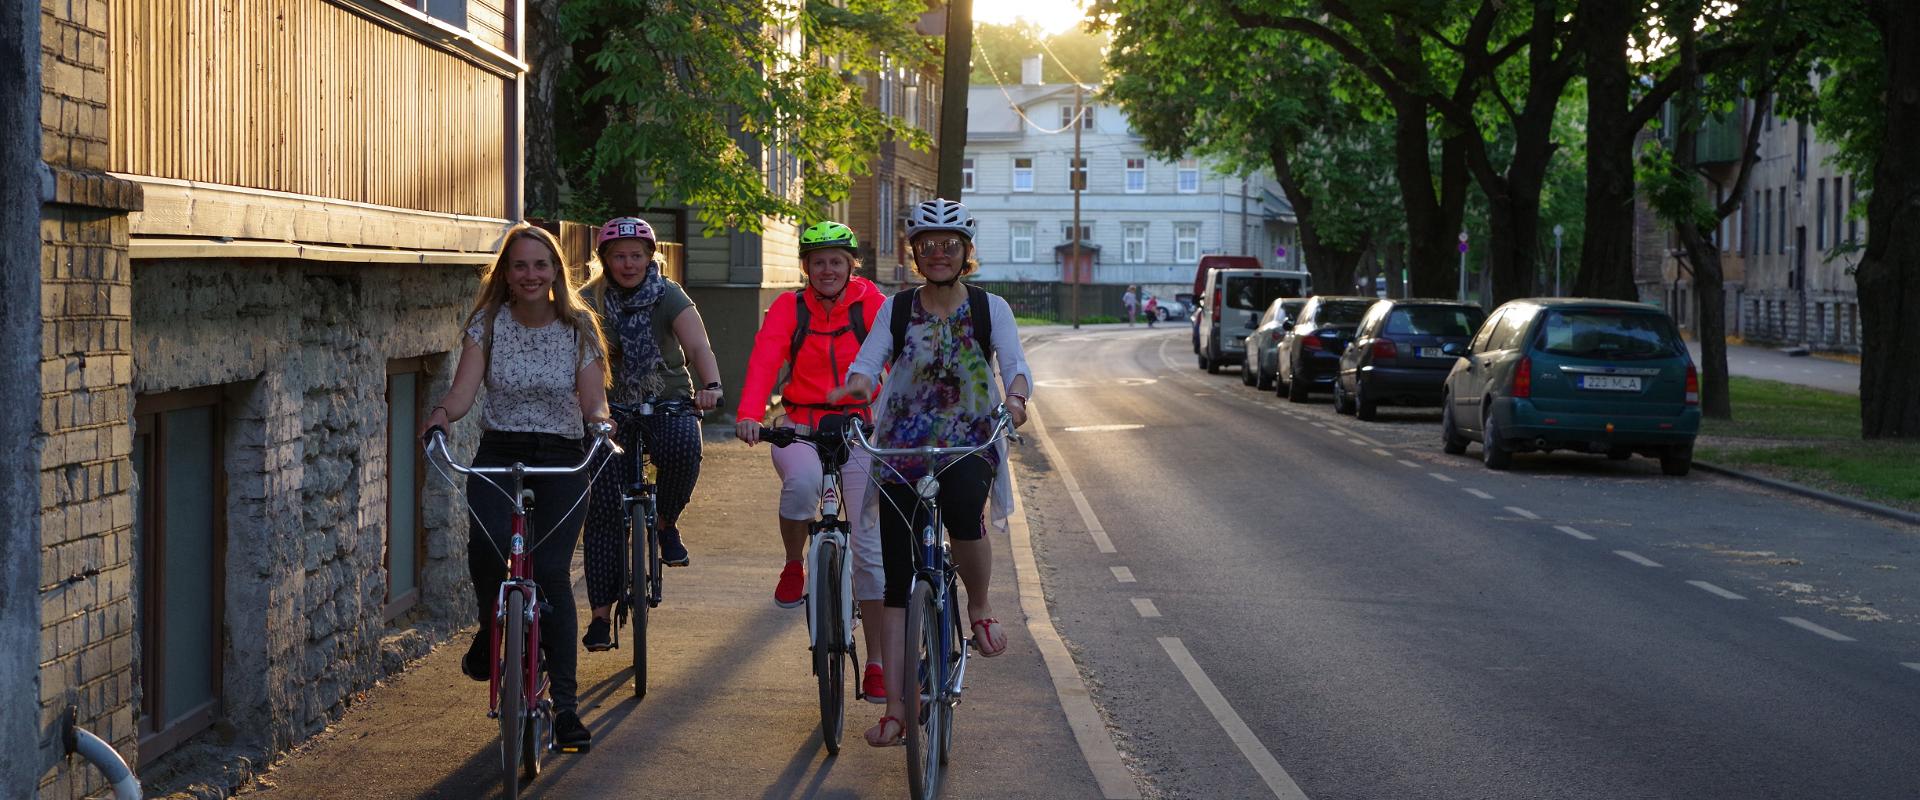 Cycling along the streets of Tallinn in the evening